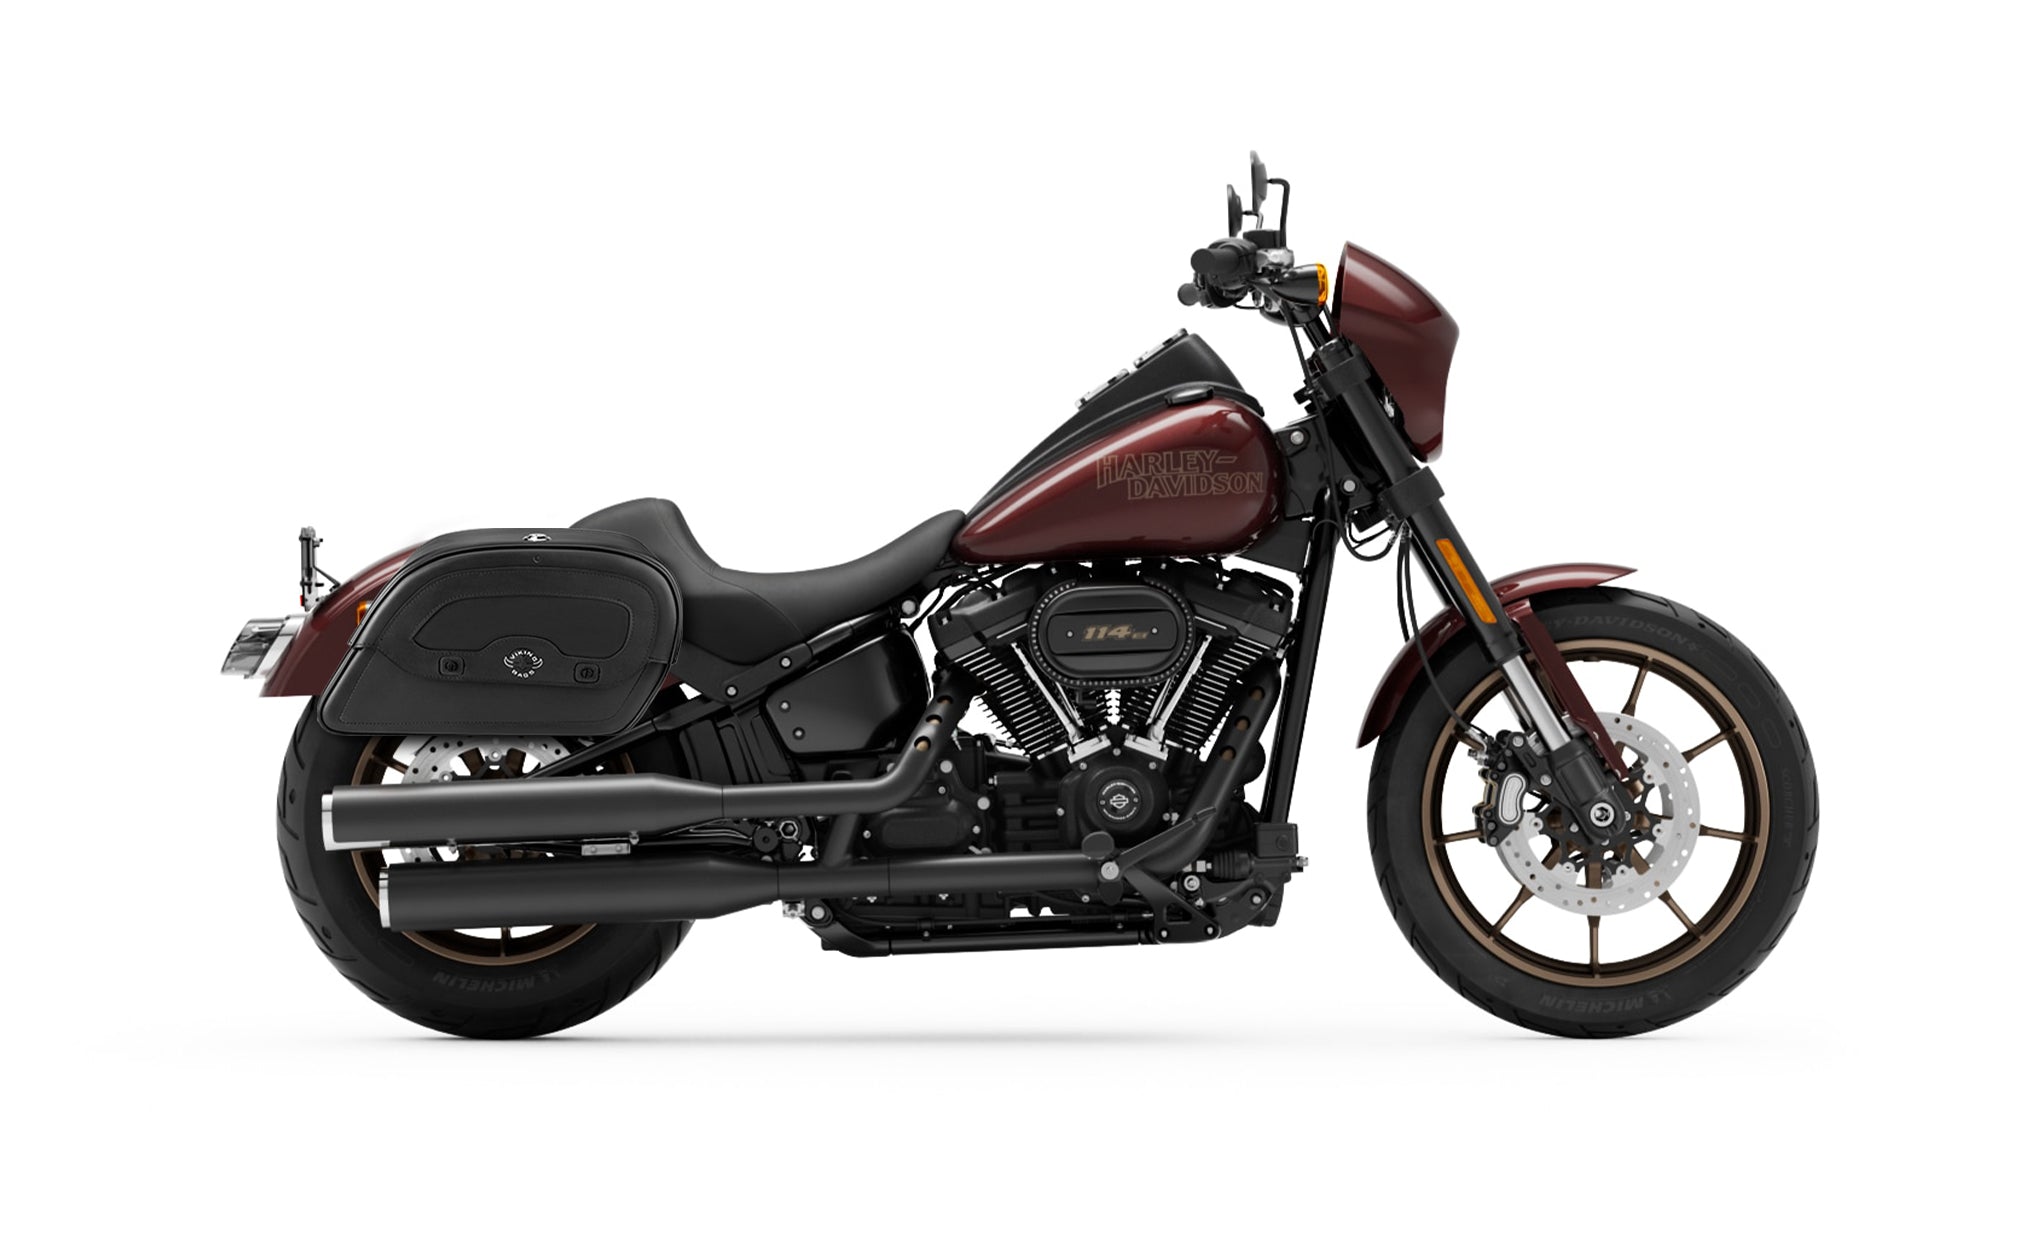 22L - Warrior Medium Quick-Mount Motorcycle Saddlebags For Harley Softail Low Rider S FXLRS @expand